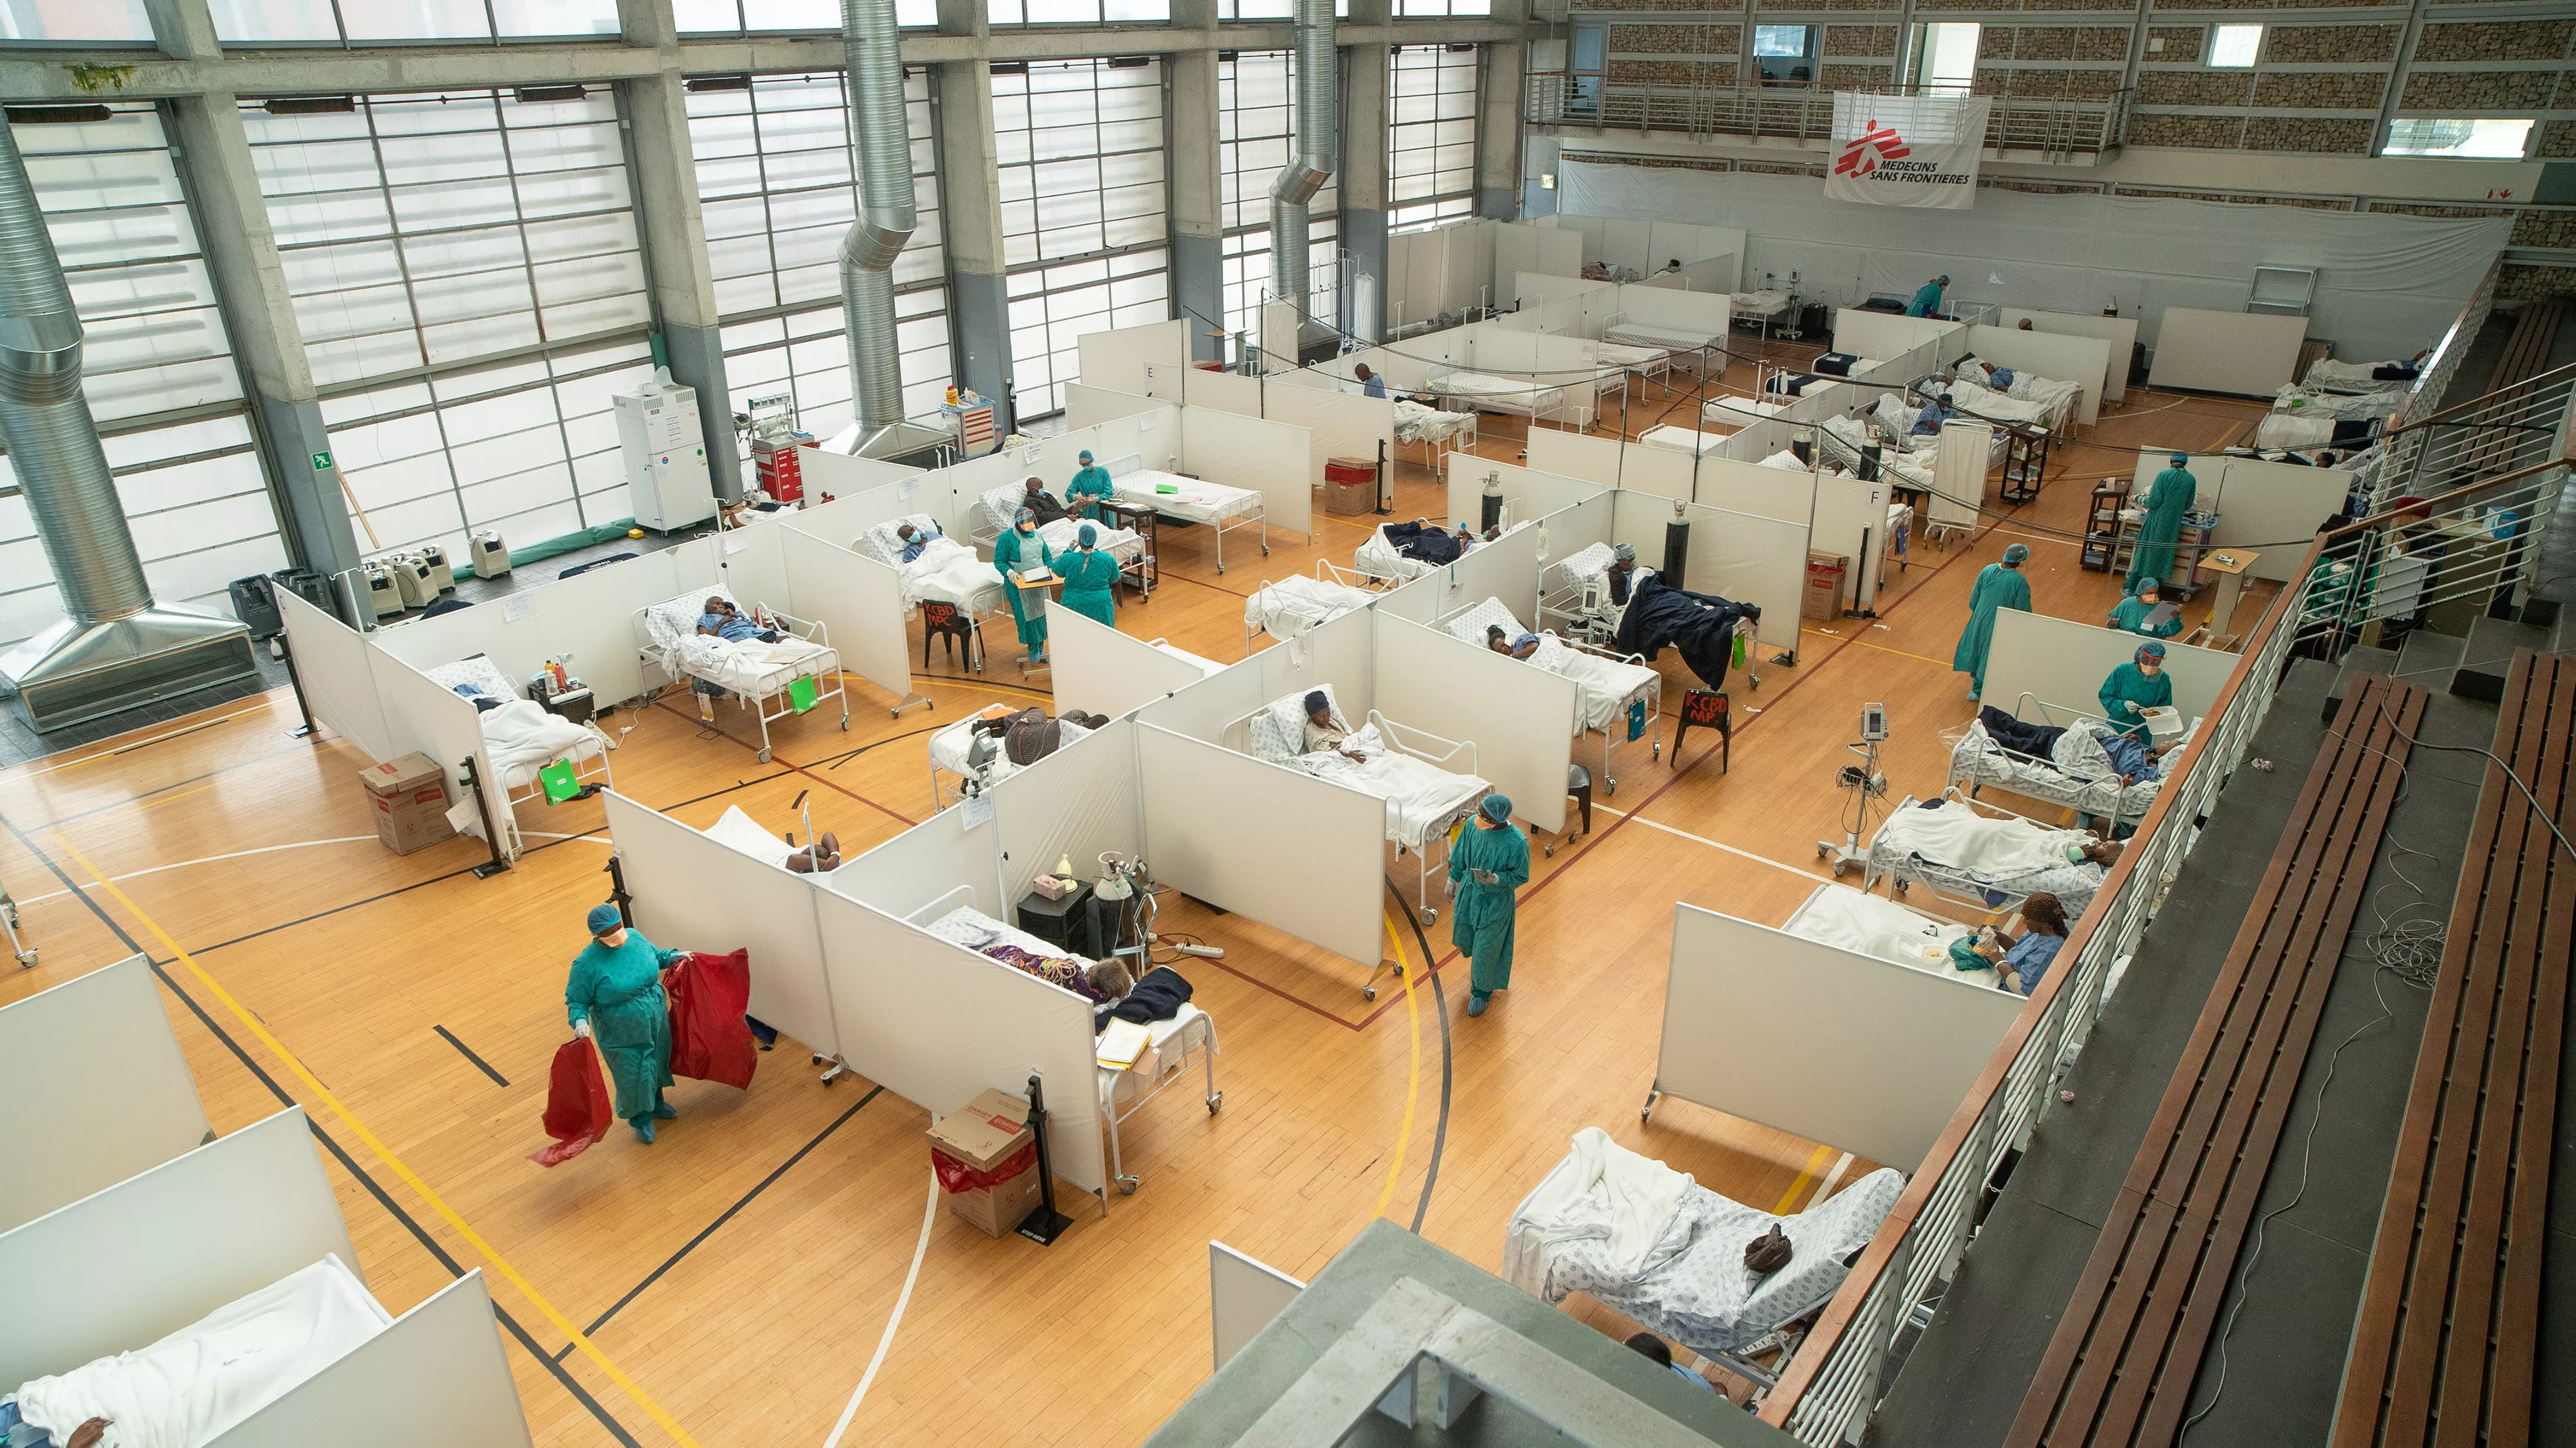 The 60-bed Khayelitsha Field Hospital was developed by MSF to support the nearby Khayelitsha District Hospital to cope with the pressures of peak COVID-19 transmission in the Western Cape.